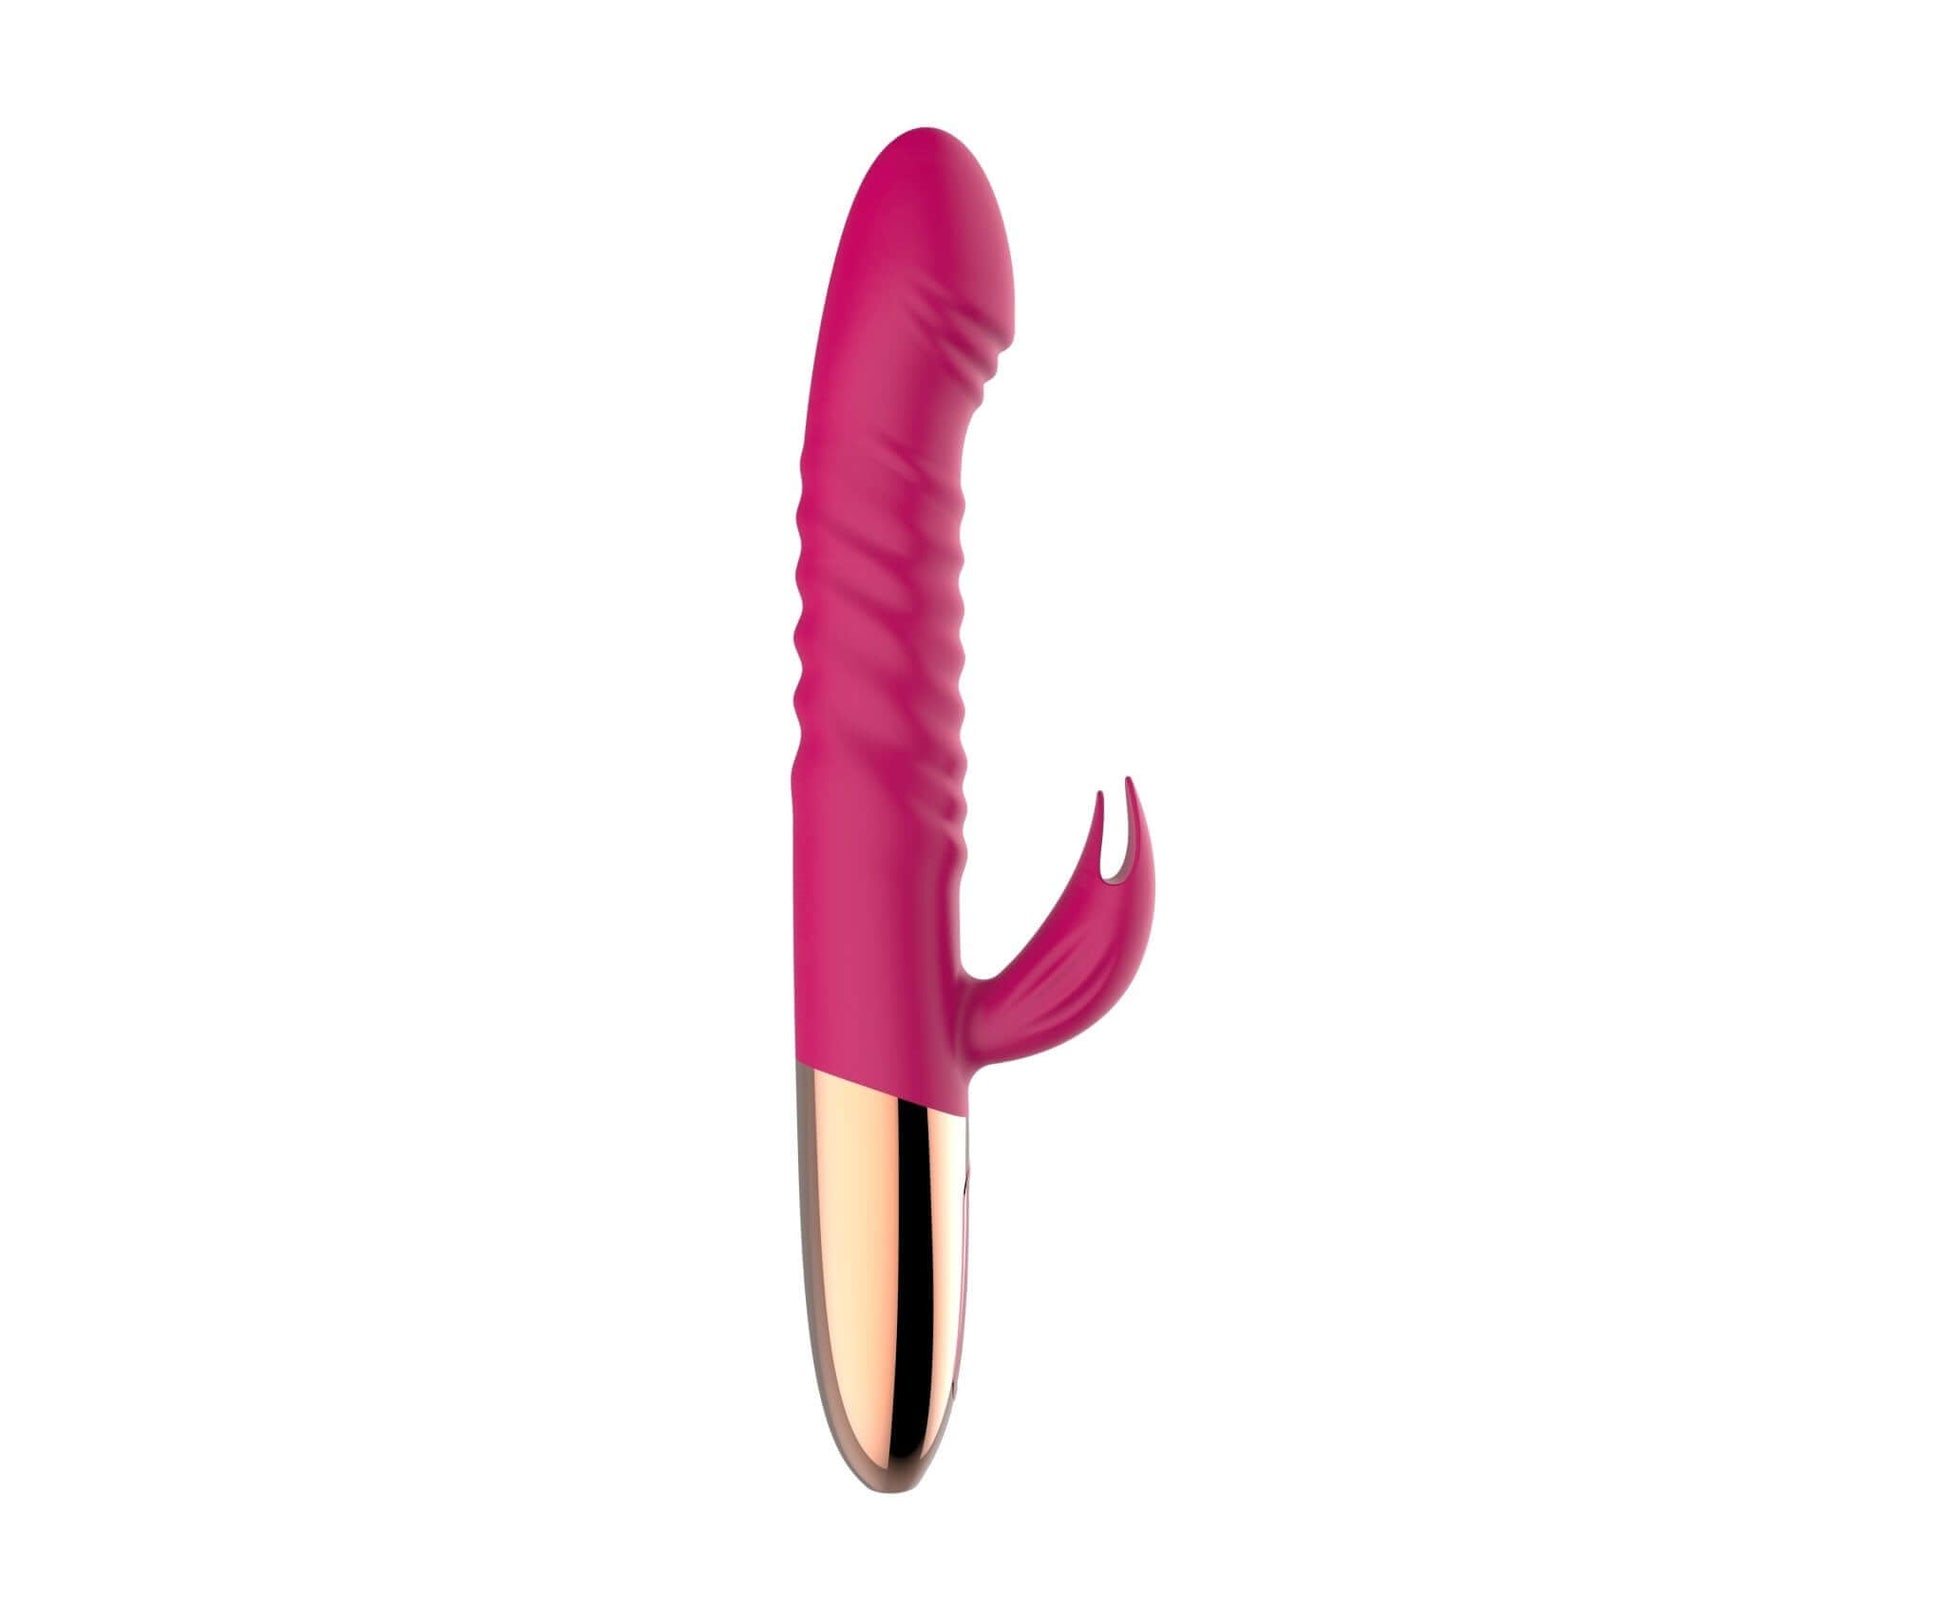 The Pleaser Finesse G-Spot and Clitoris - The Pleaser Pro